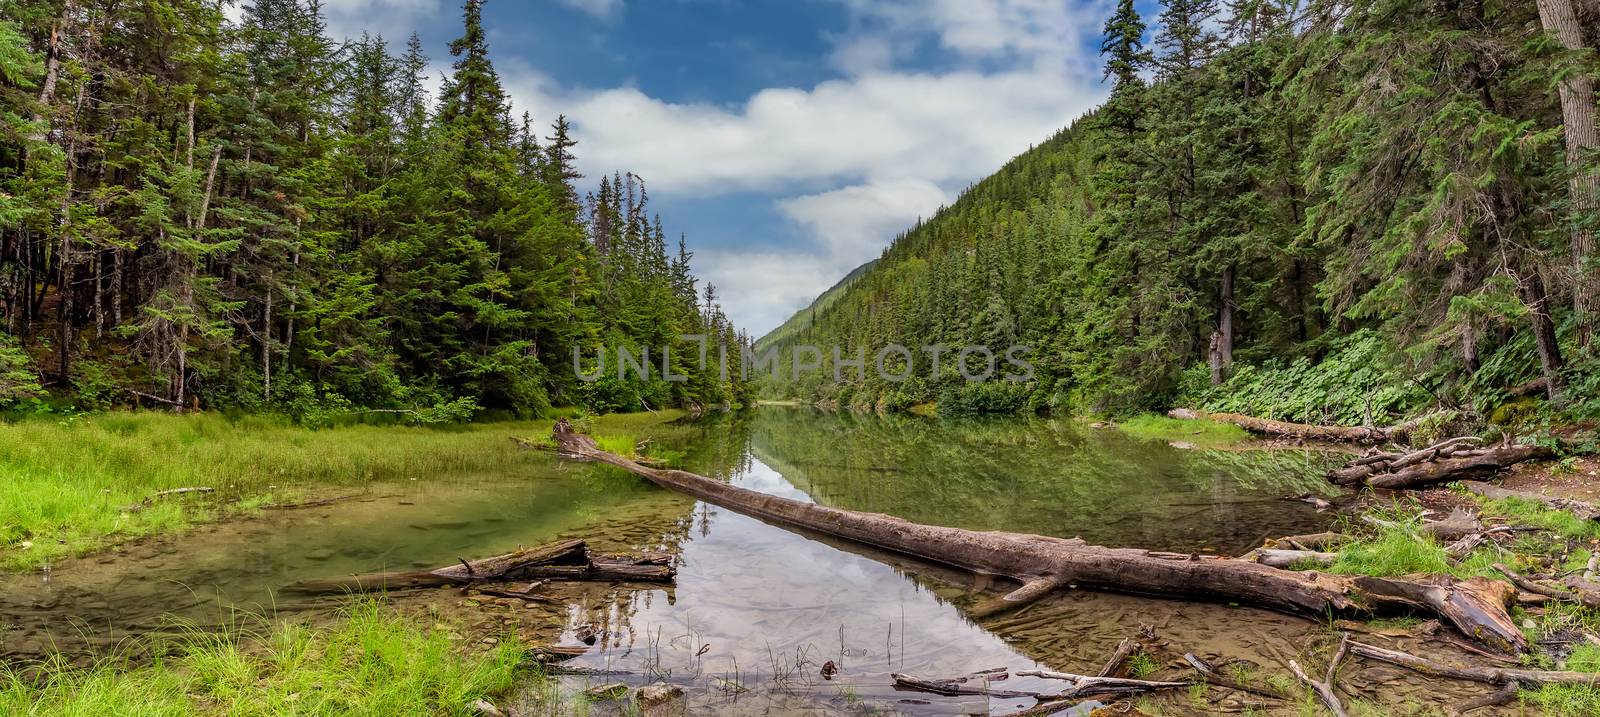 Beautiful panoramic landscape of Icy Lake in Alaska near Skagway. Lush green forest surrounding the lake. Fallen tree in the water. Blue cloudy sky as a background by DamantisZ